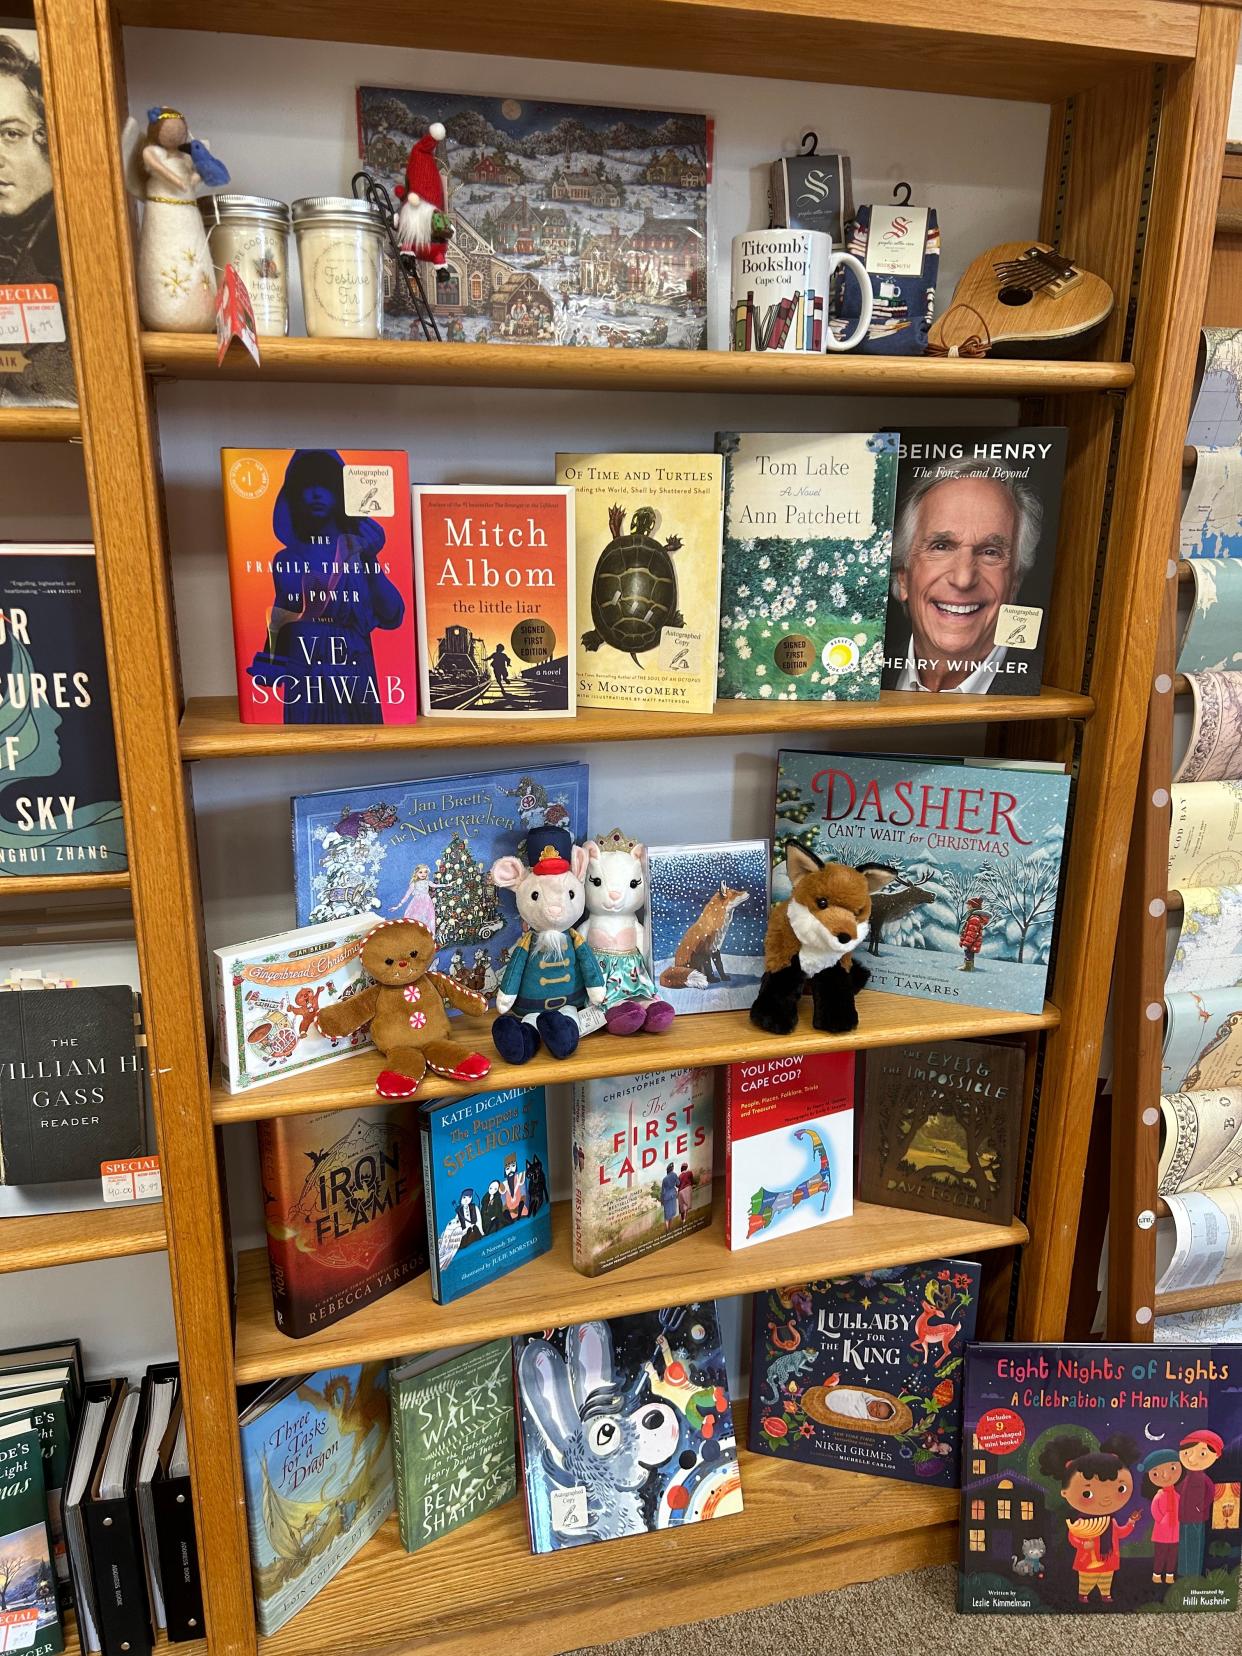 Some gift recommendations from the staff at Titcomb's Bookshop in East Sandwich.